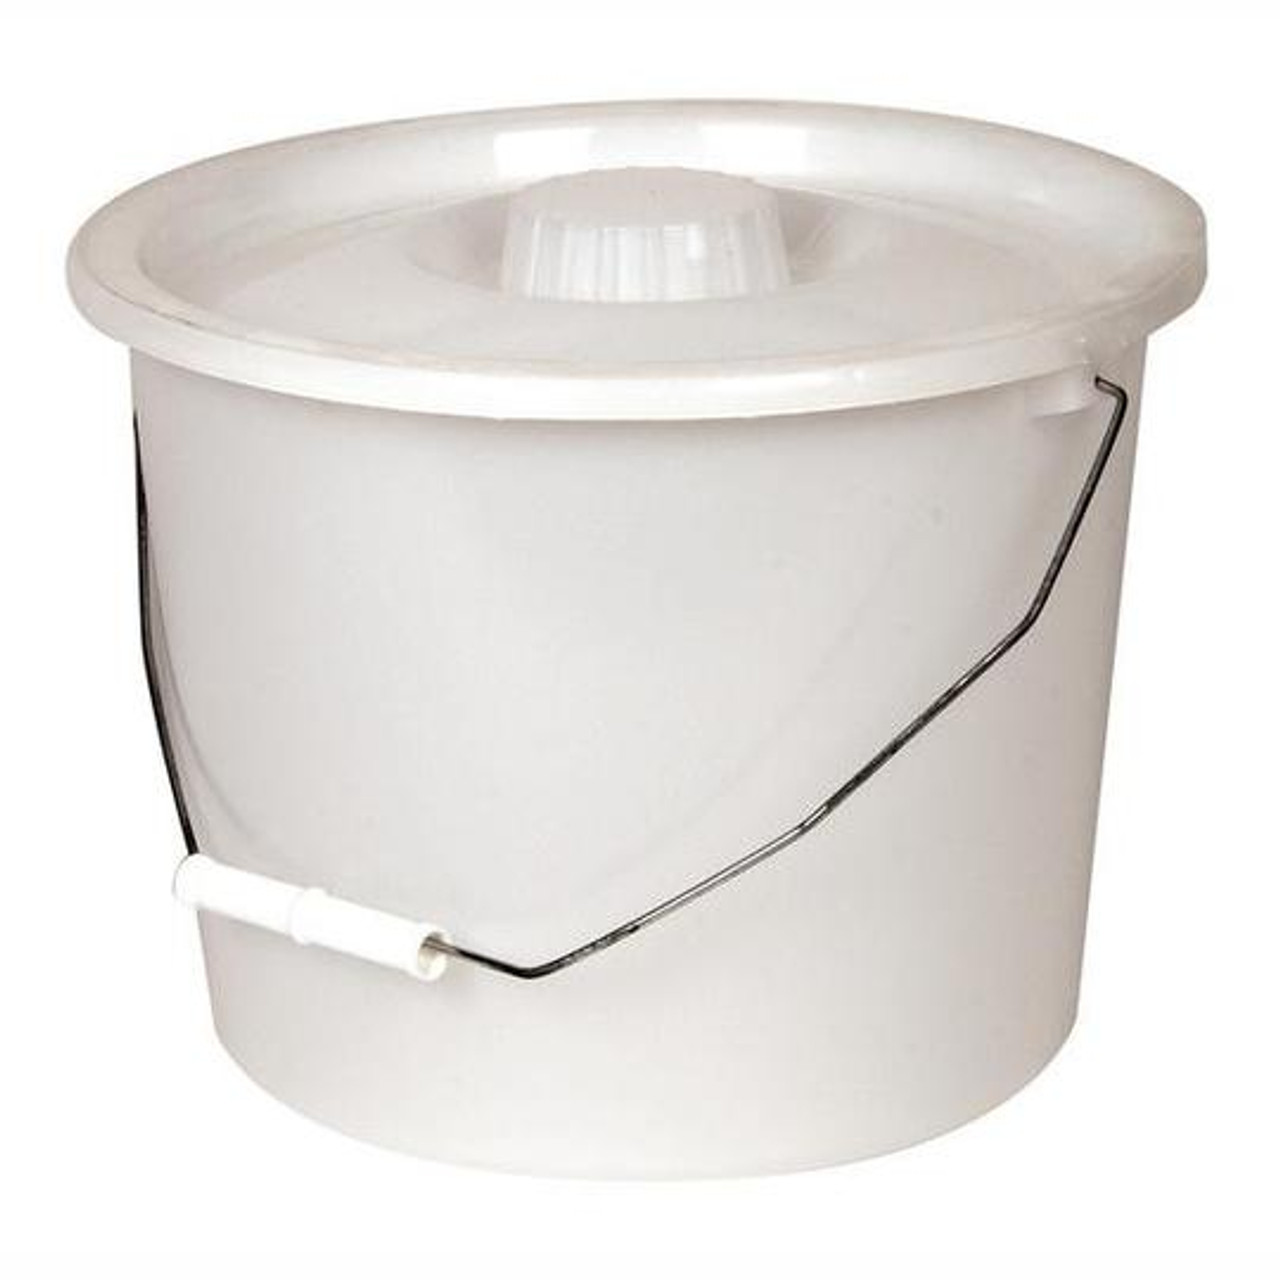 511501 Lid only for commode pail, white (511501)